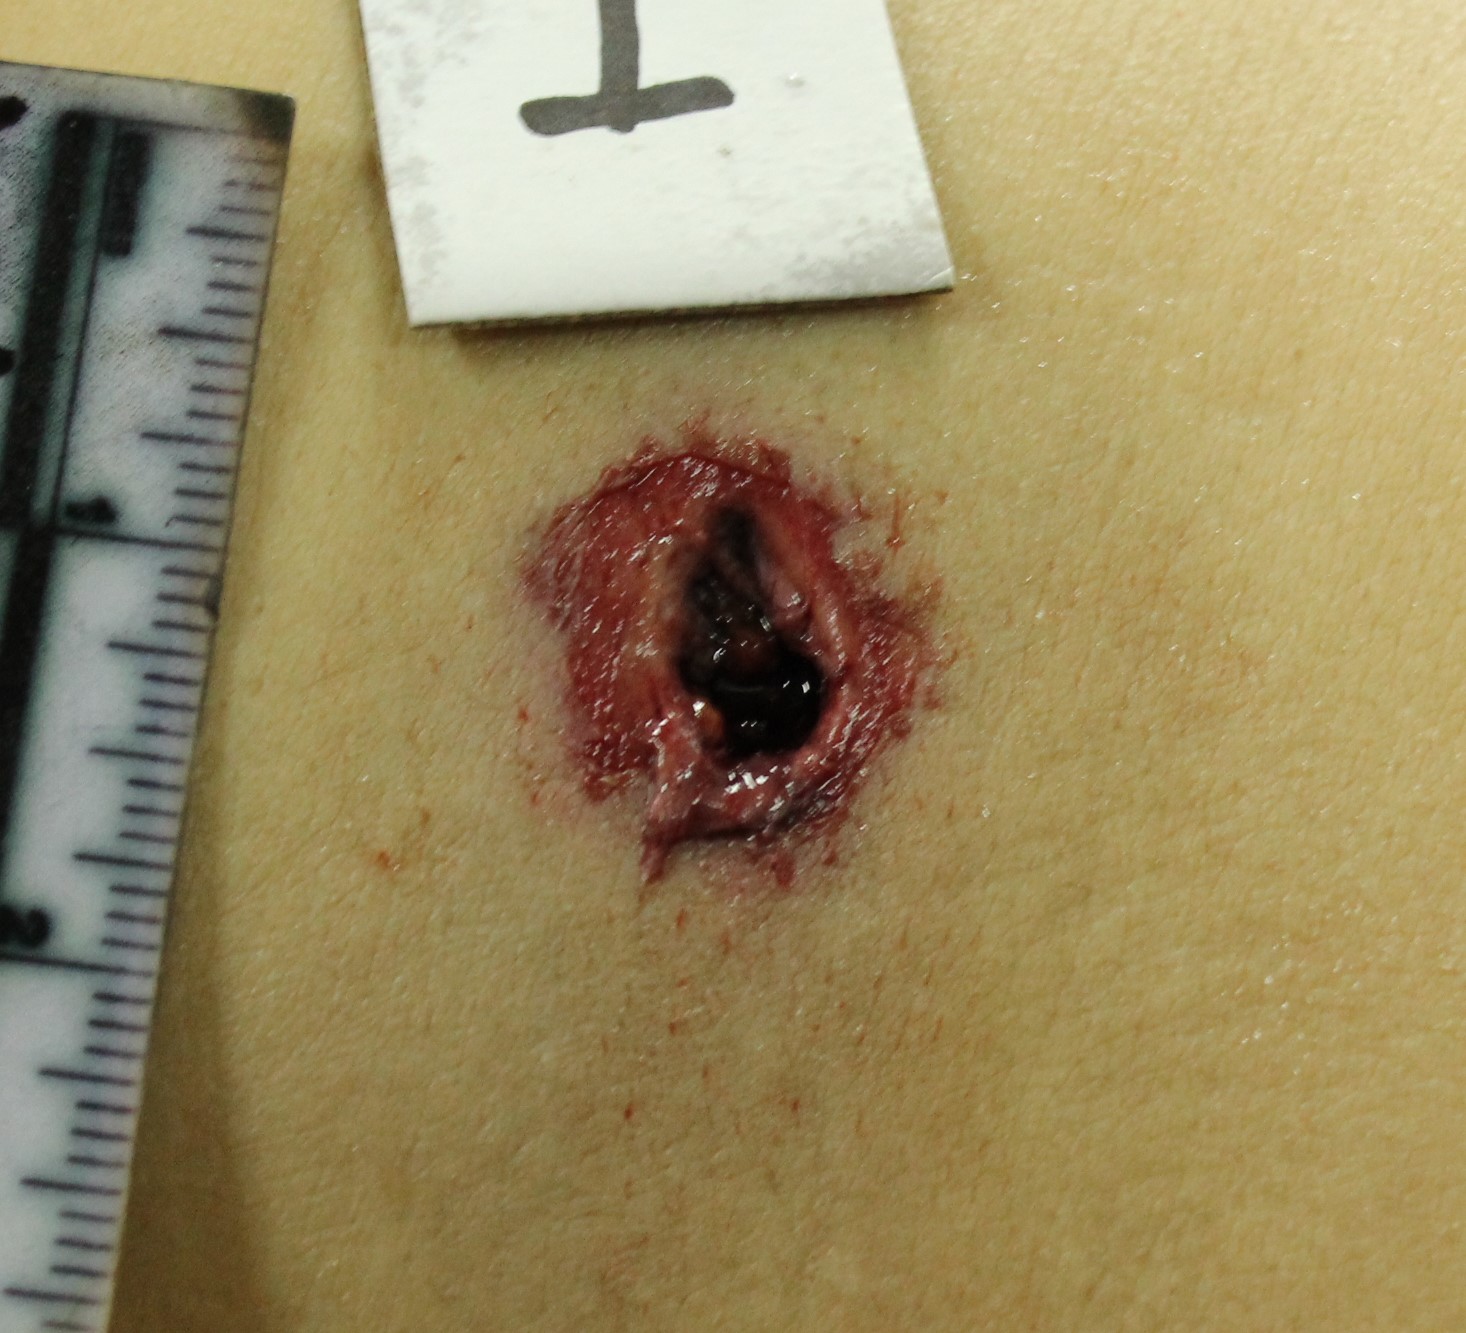 Figure 2 - Exit wound from a rifled small arm (revolver) showing larger injury, in comparison with the entry wound